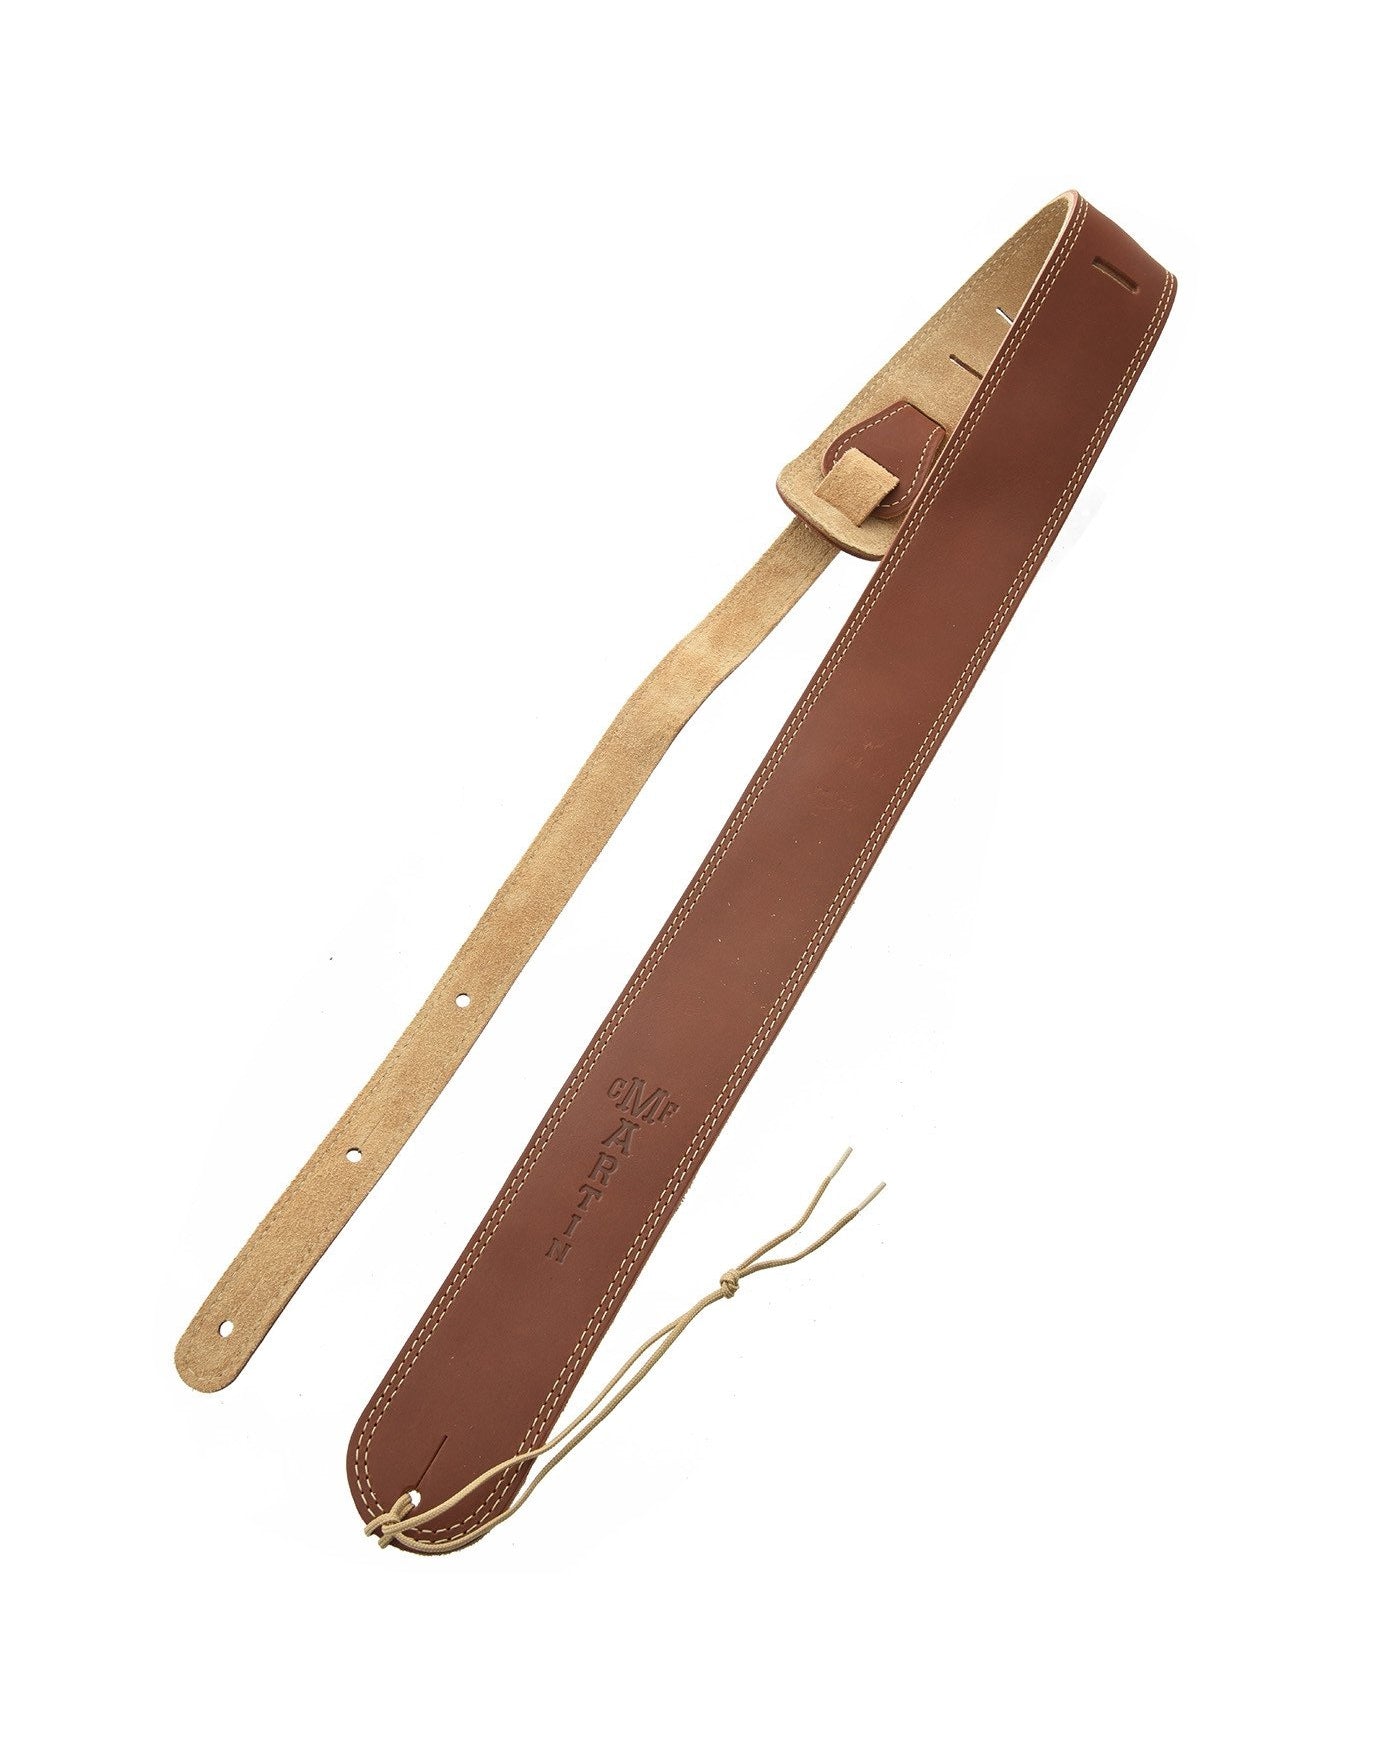 Image 1 of Martin Ball Glove Leather & Suede Strap, Brown - SKU# MSTP12 : Product Type Accessories & Parts : Elderly Instruments